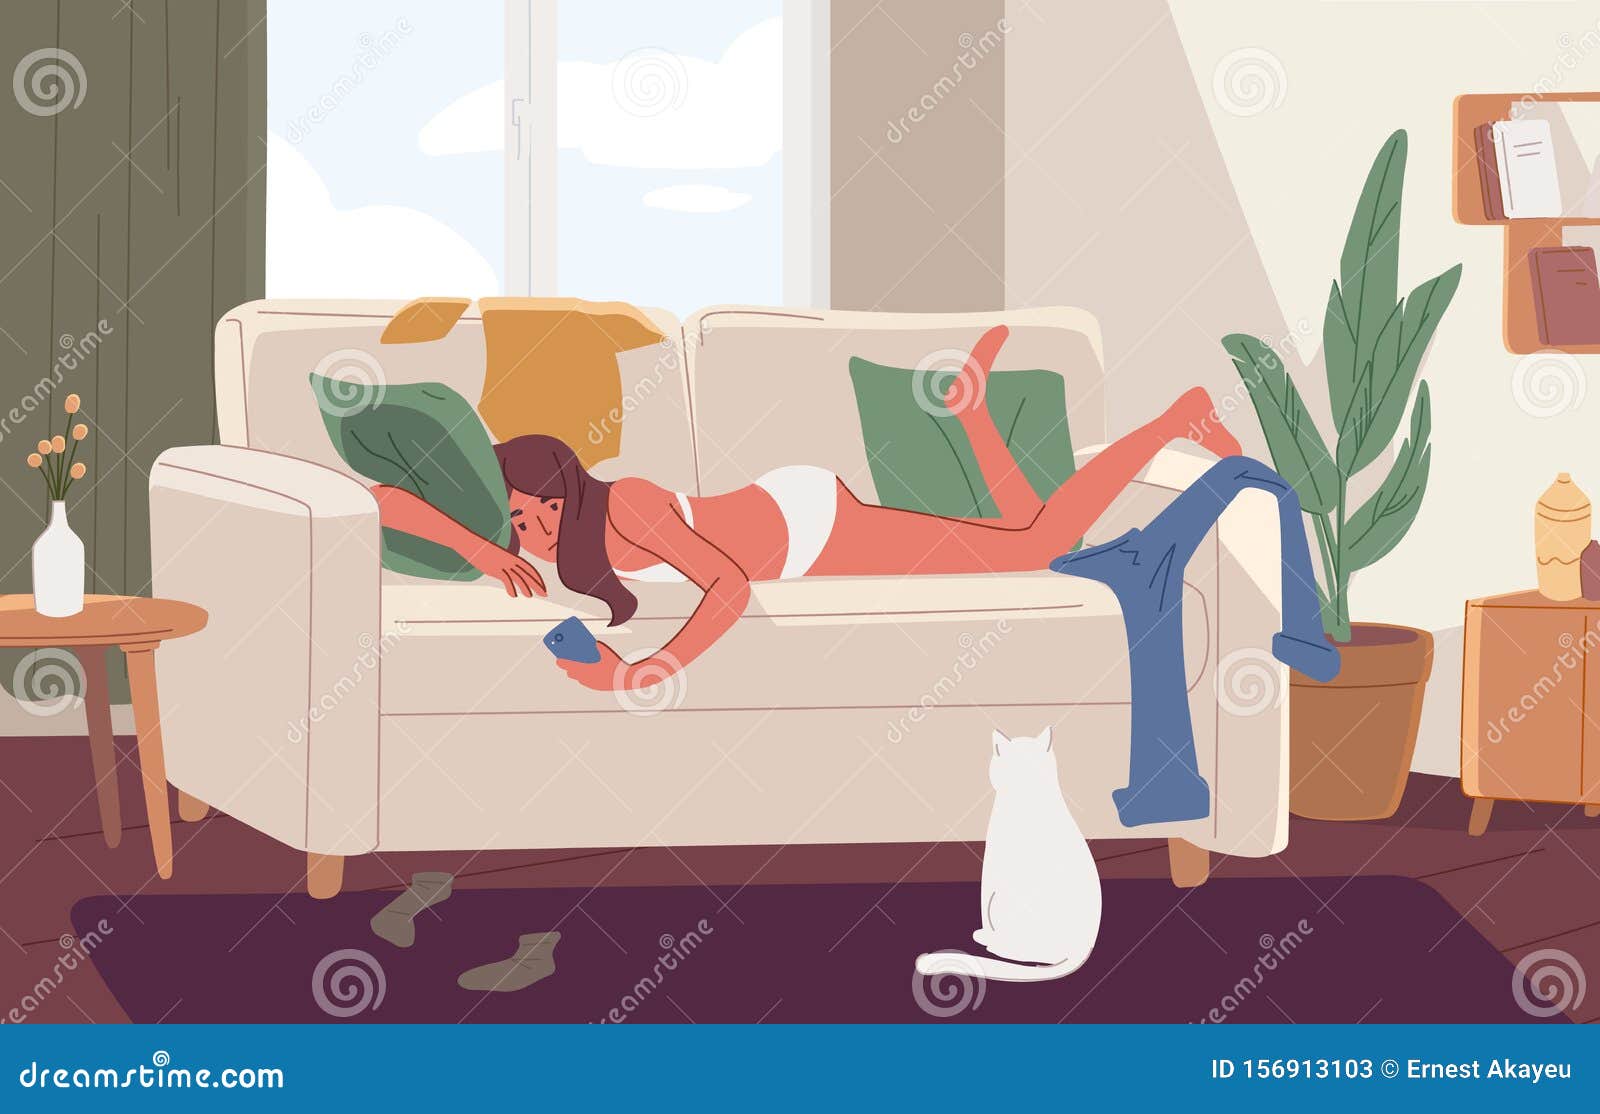 Apathetic Young Woman Lying on Sofa in Messy Room or Apartment and Surfing  Internet on Smartphone. Lazy Girl Resting on Stock Vector - Illustration of  cartoon, apartment: 156913103